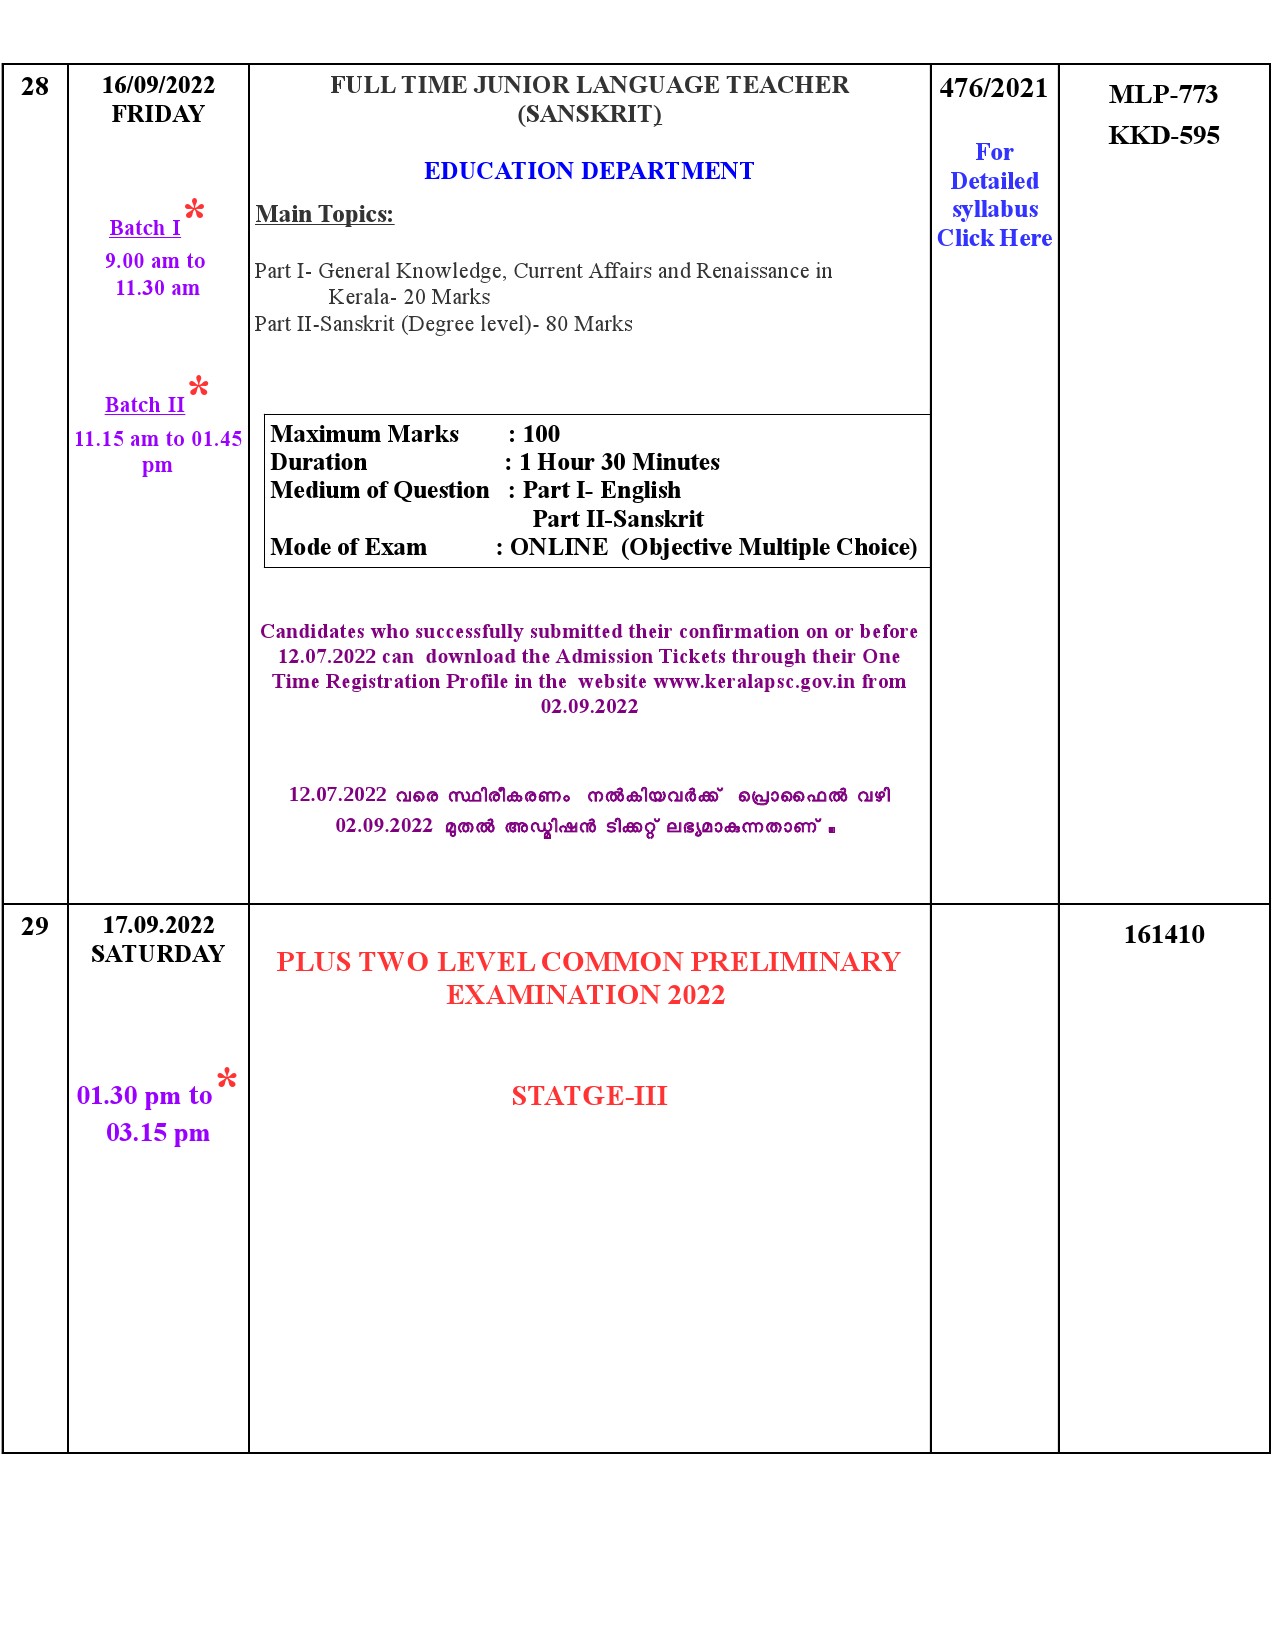 Examination Programme For The Month Of September 2022 - Notification Image 12